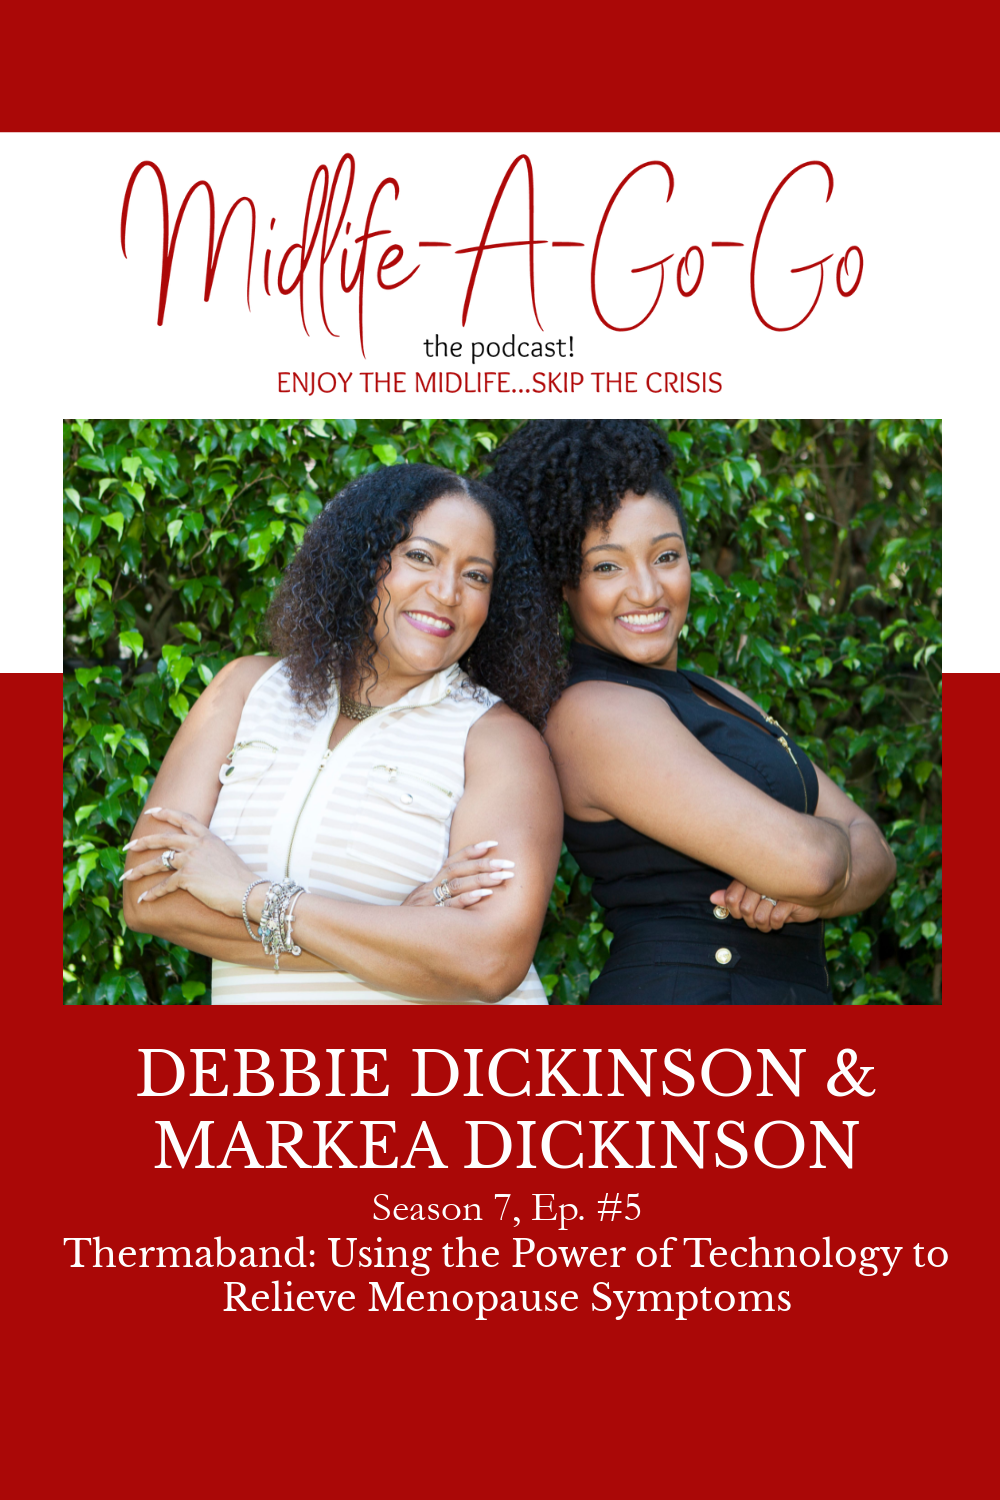 Thermaband: Using the Power of Technology to Relieve Menopause Symptoms with Debbie and Markea Dickinson